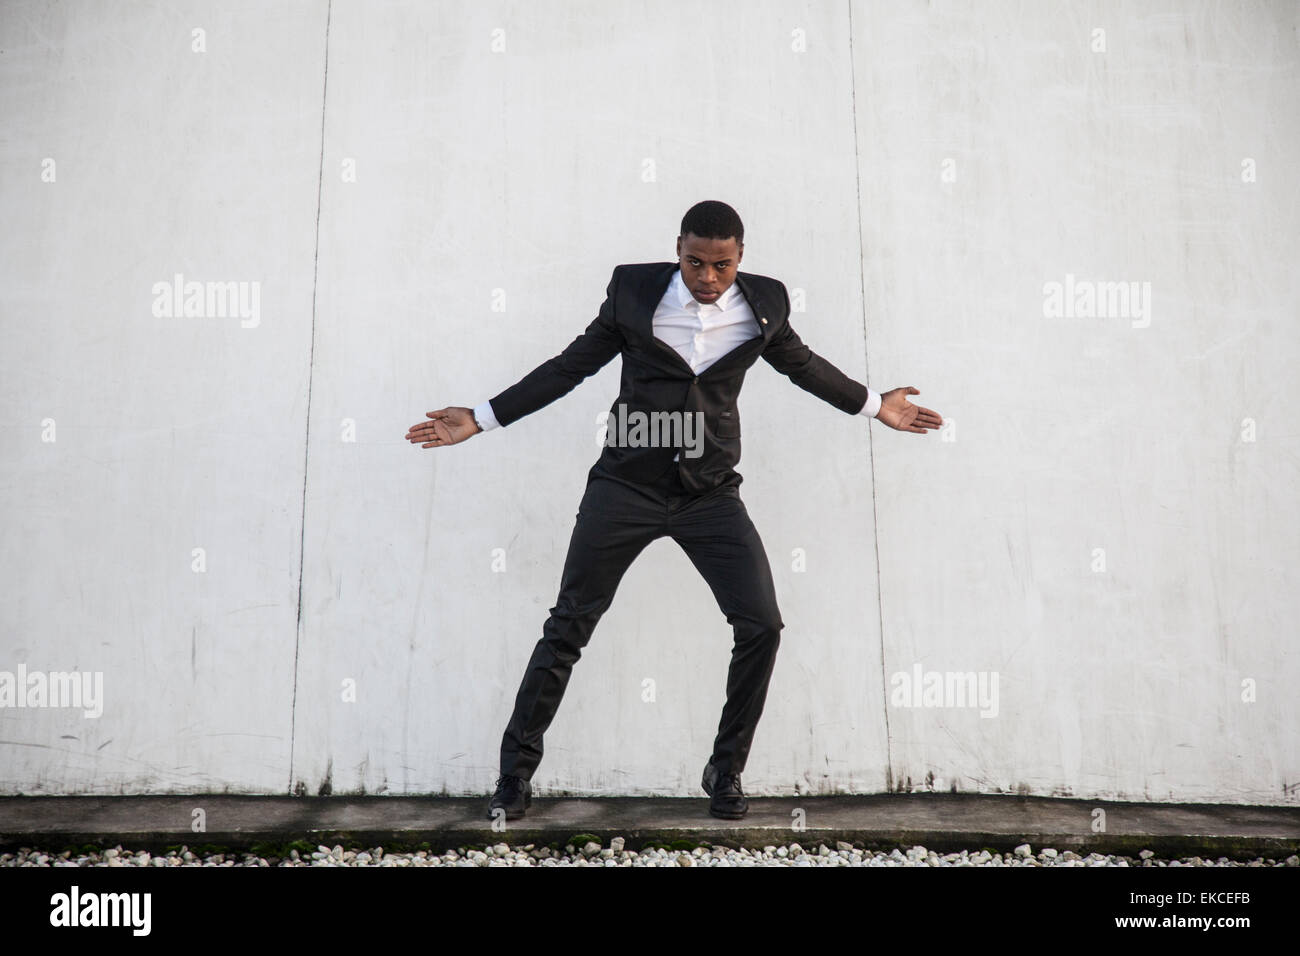 Young man in a suit street dancing Stock Photo